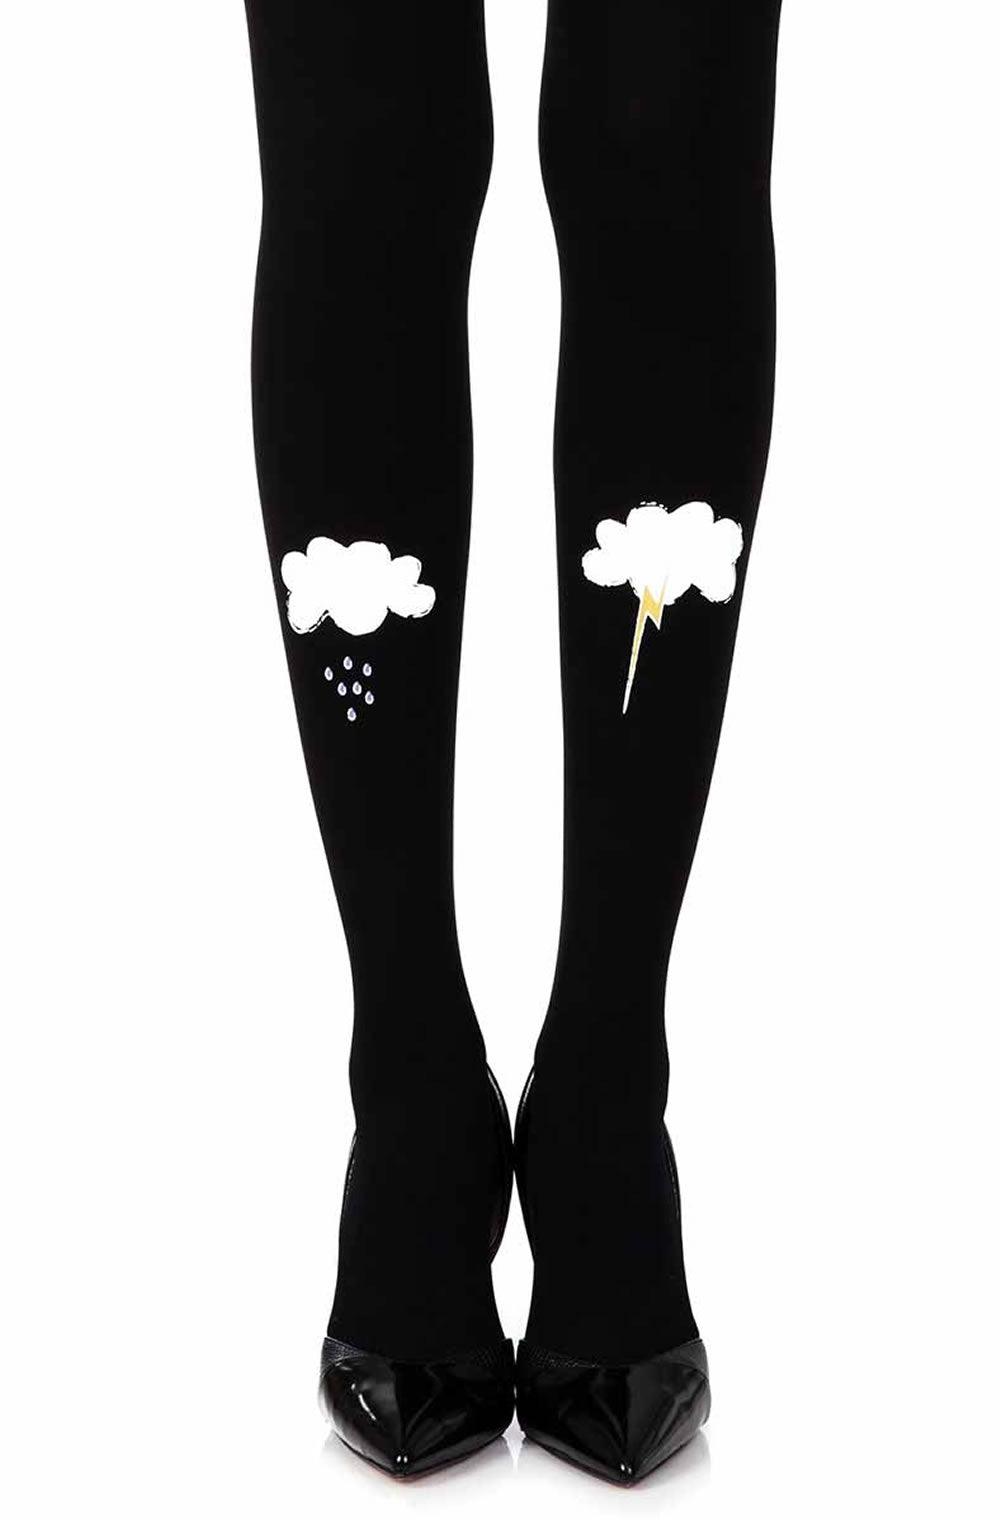 Zohara "The Perfect Storm" Black Print Tights - Sydney Rose Lingerie 